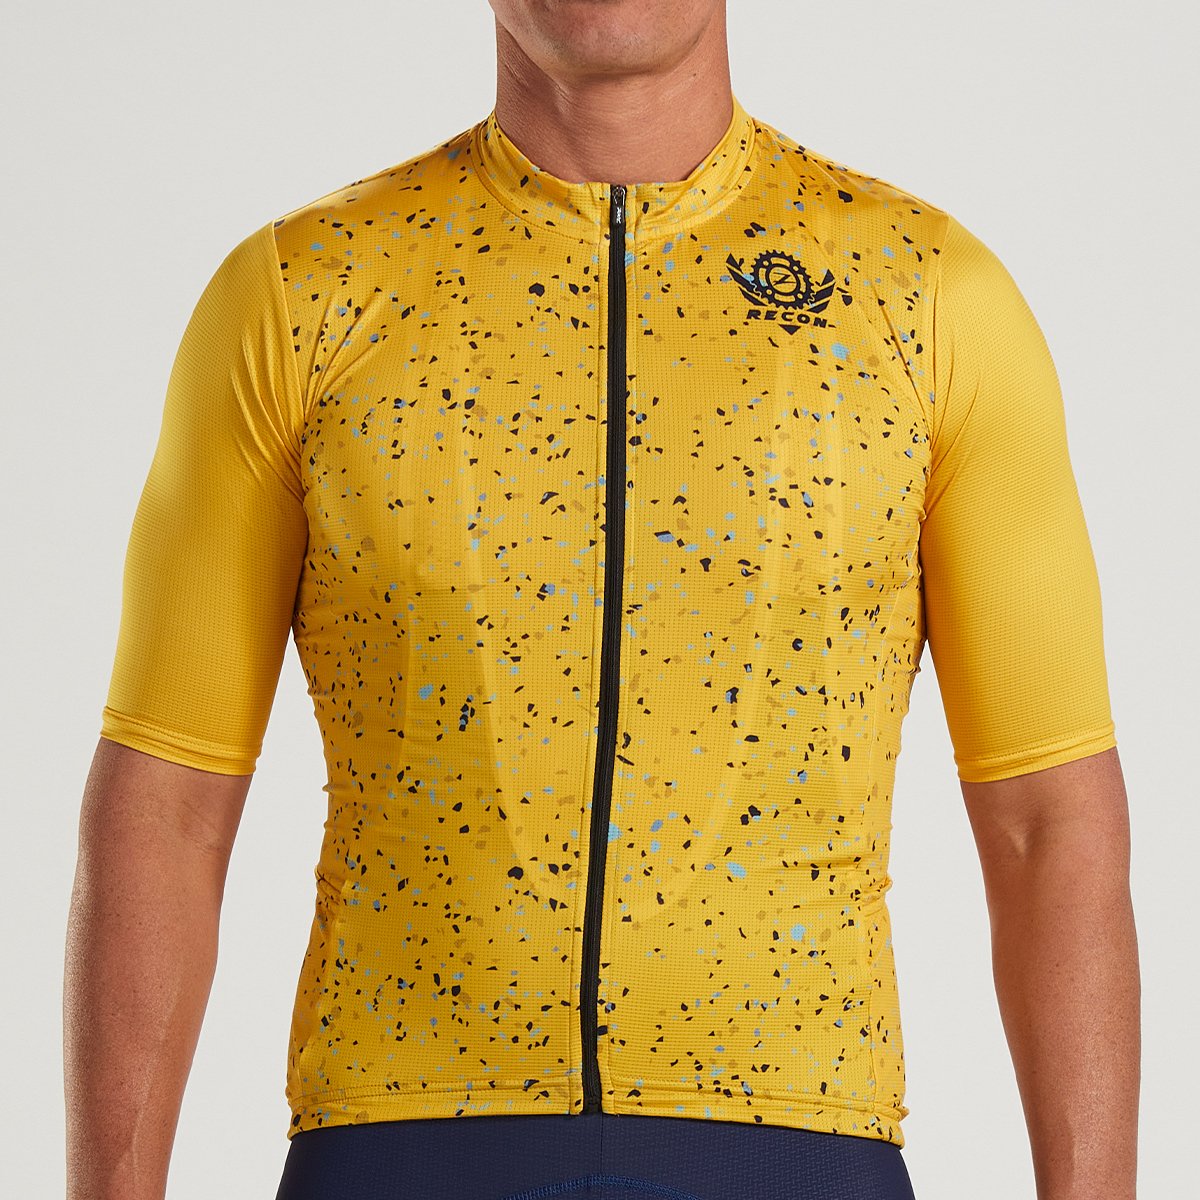 Zoot Sports CYCLE APPAREL M RECON CYCLE JERSEY - SULPHER